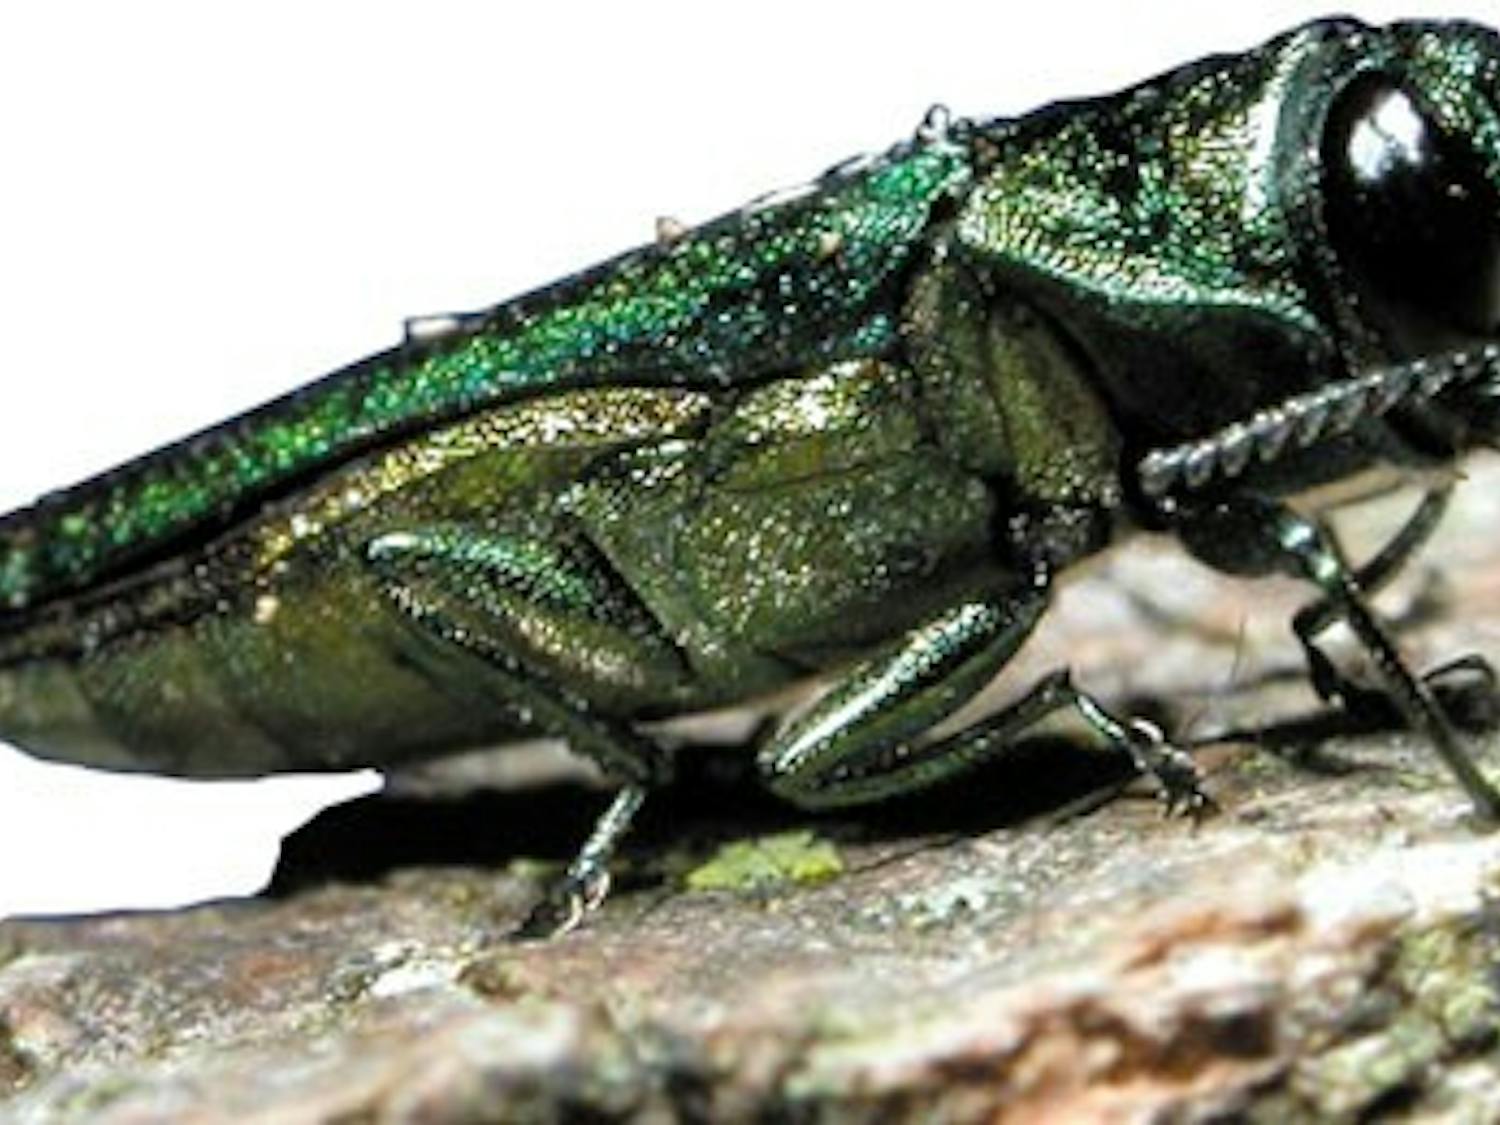 The emerald ash borer has killed millions of trees since being discovered in 2002.